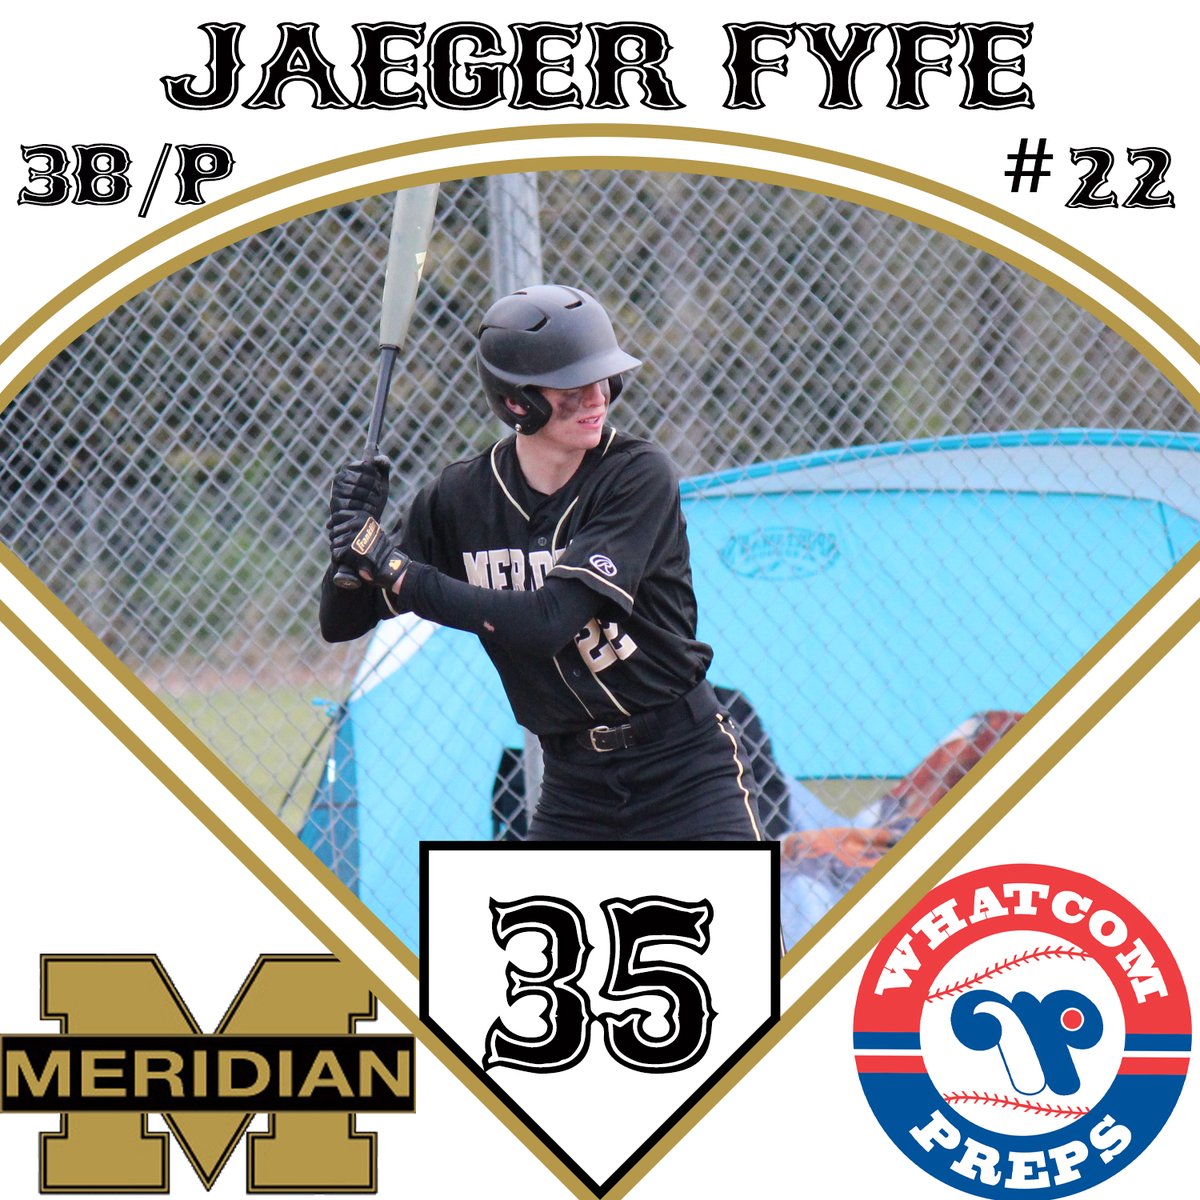 The 2022 Baseball Top 50 list continues with Meridian freshman @JaegerFyfe at #35. You can read about his season by checking out the link below.
Link>whatcompreps.com/2022/06/07/top…